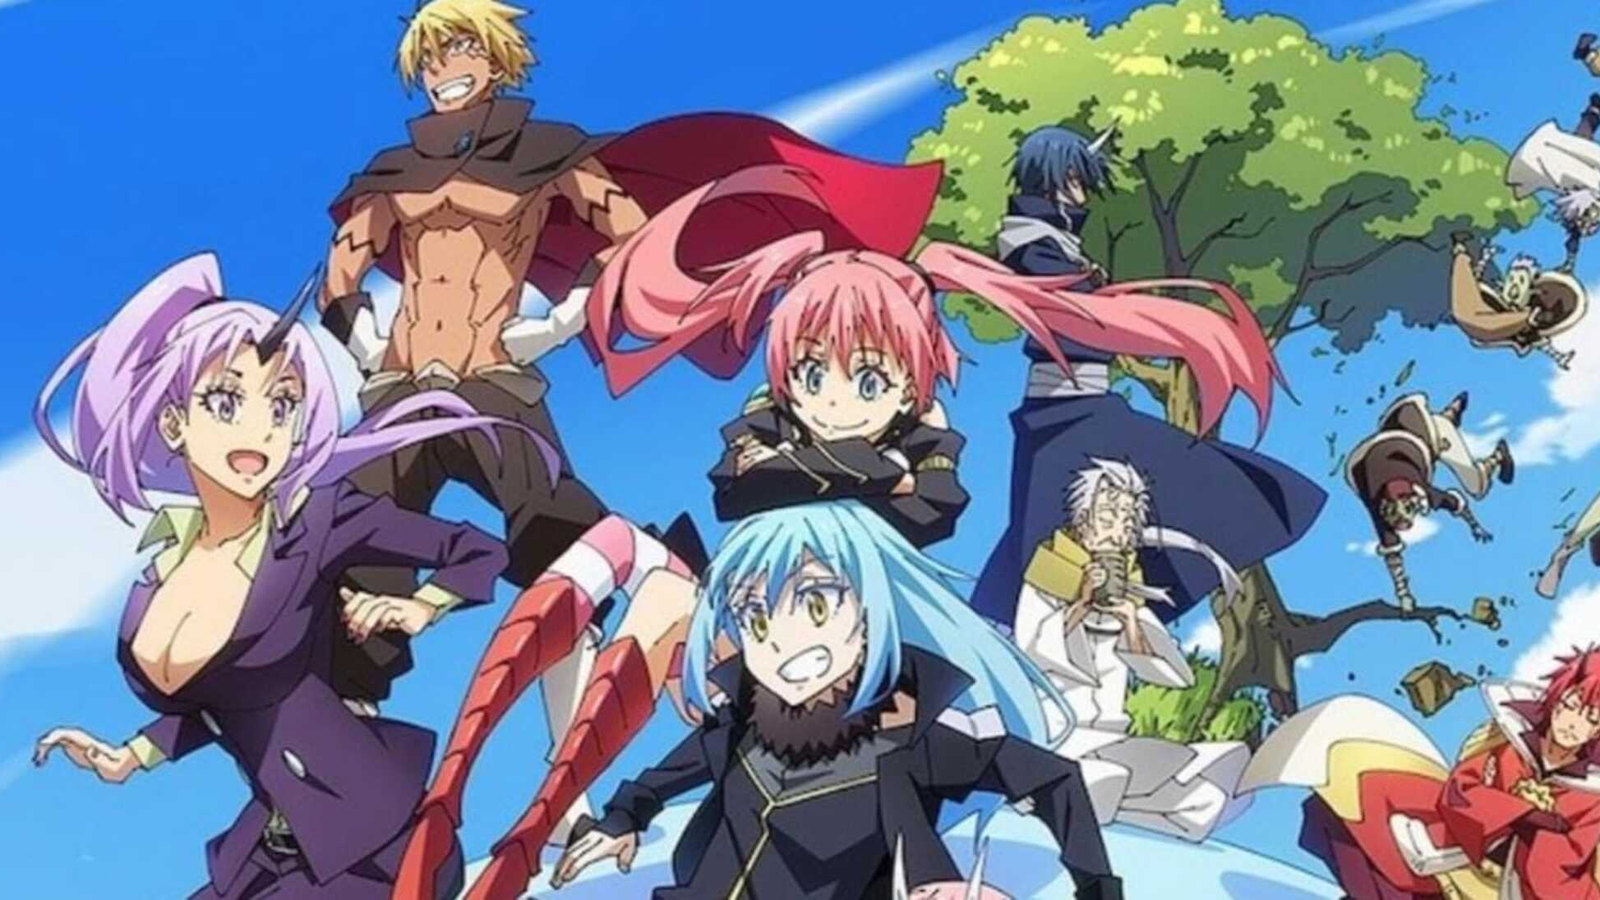 That Time I Got Reincarnated As A Slime Season 3 watch online